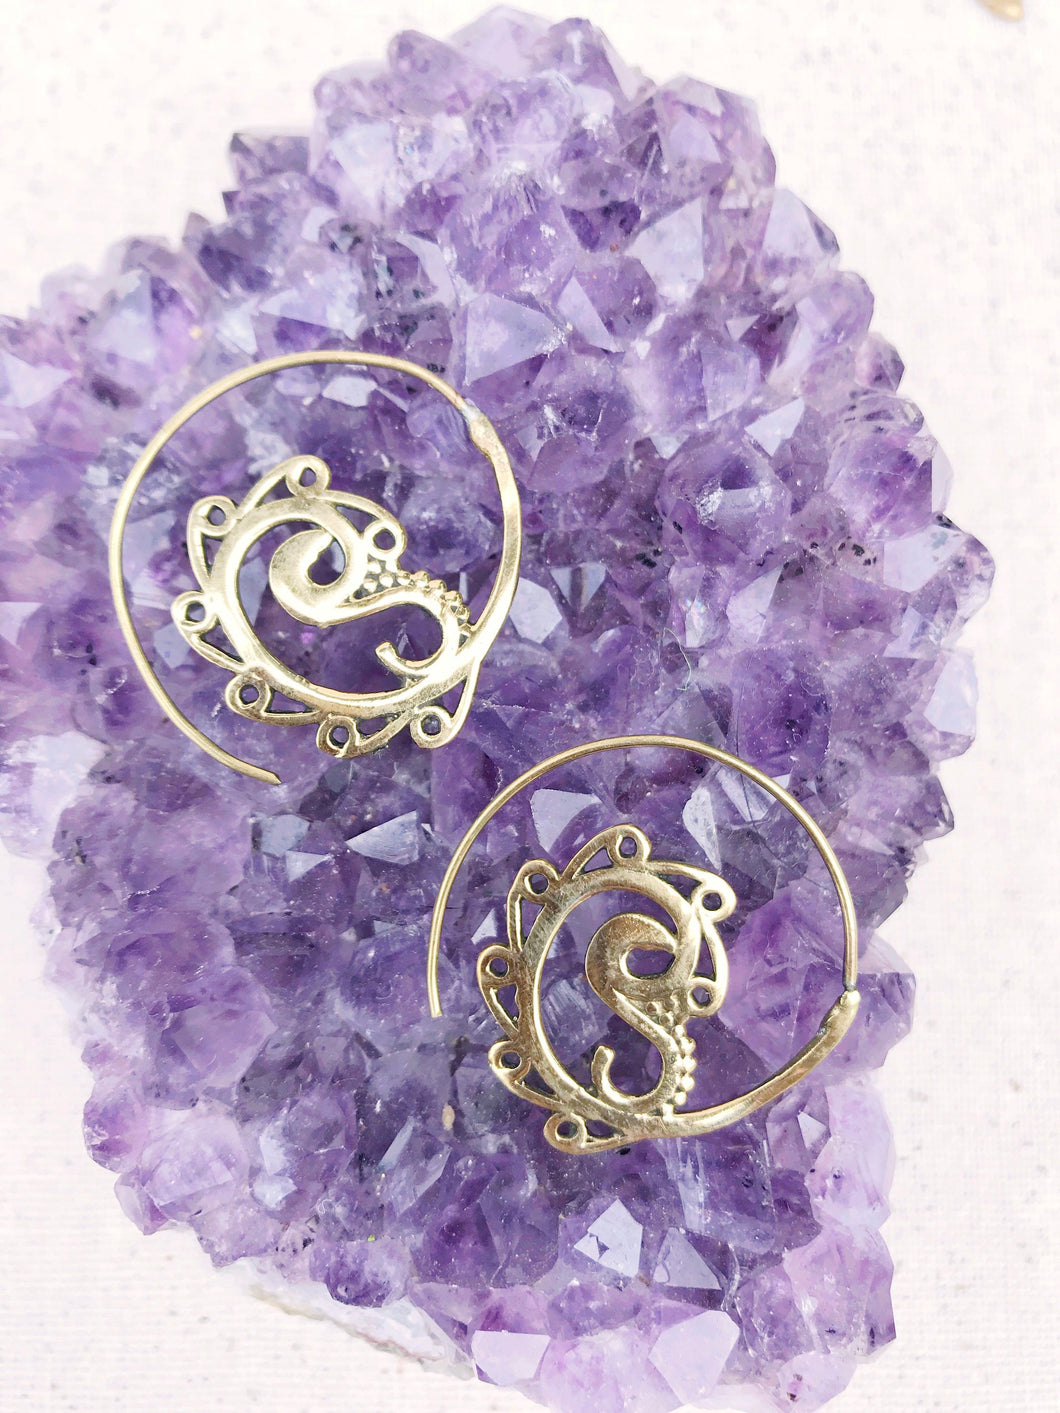 Indian Paisley Spiral Brass Earrings